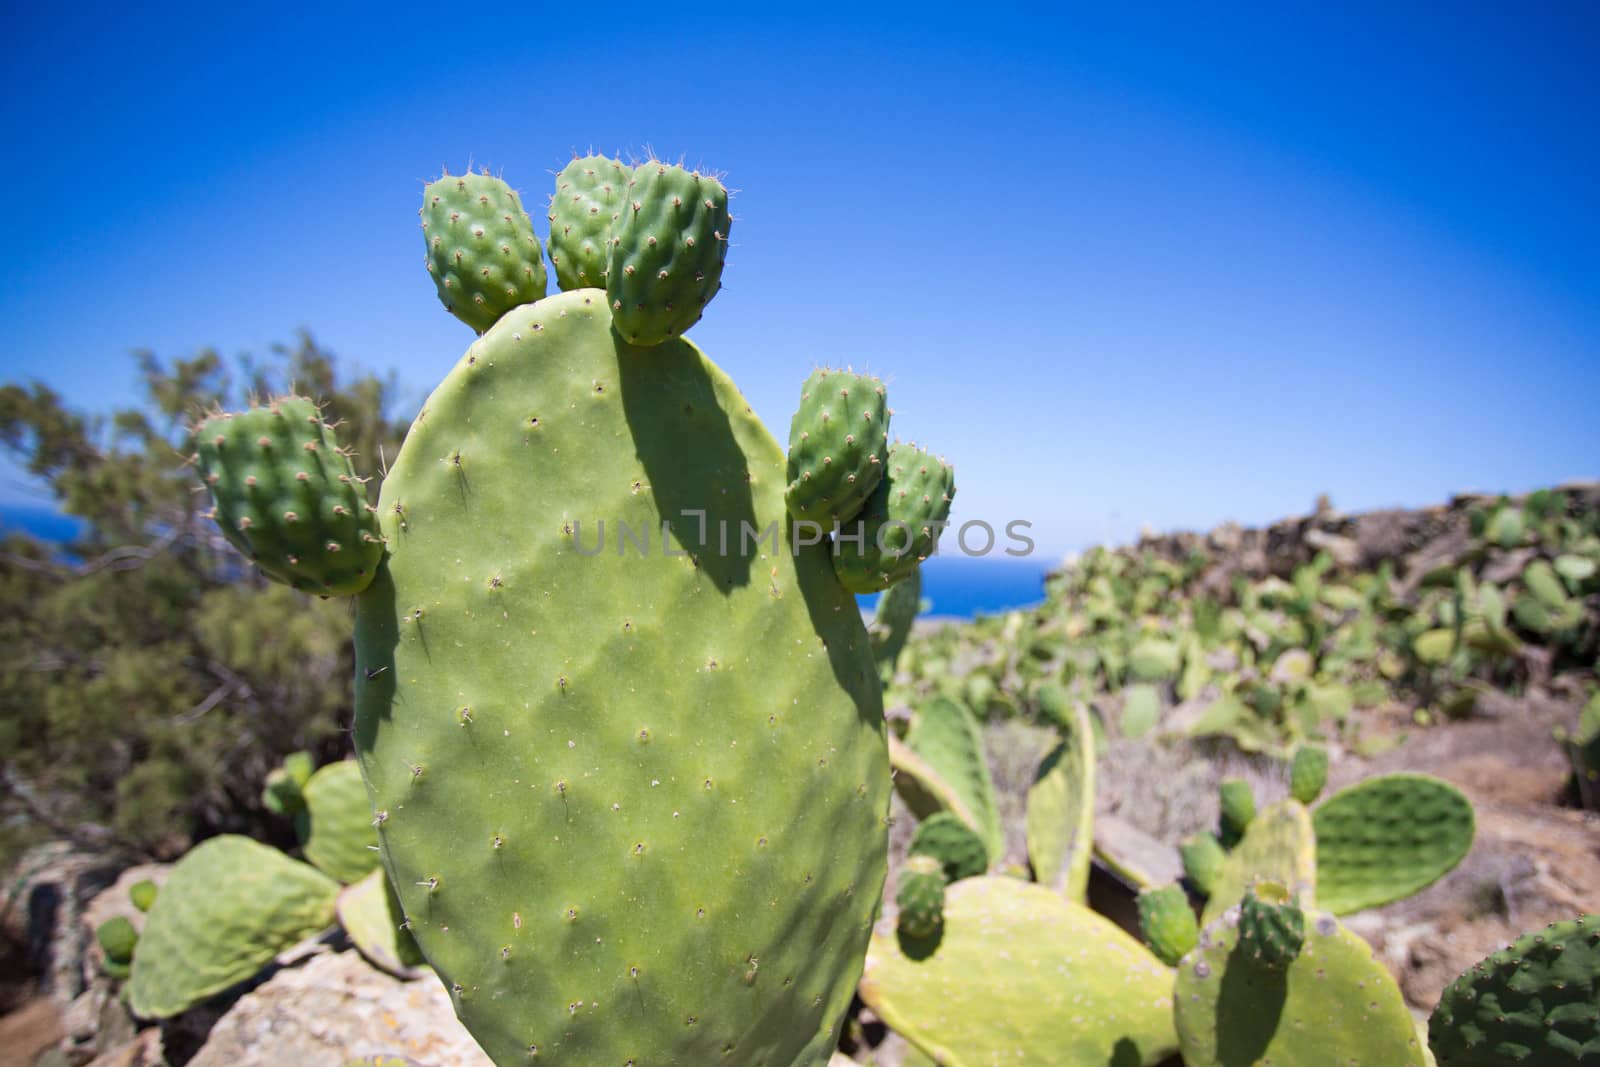 Close up of a huge cactus And you see a glimpse of the aegean sea in the distance, outside on the island of Crete, Greece 2013.